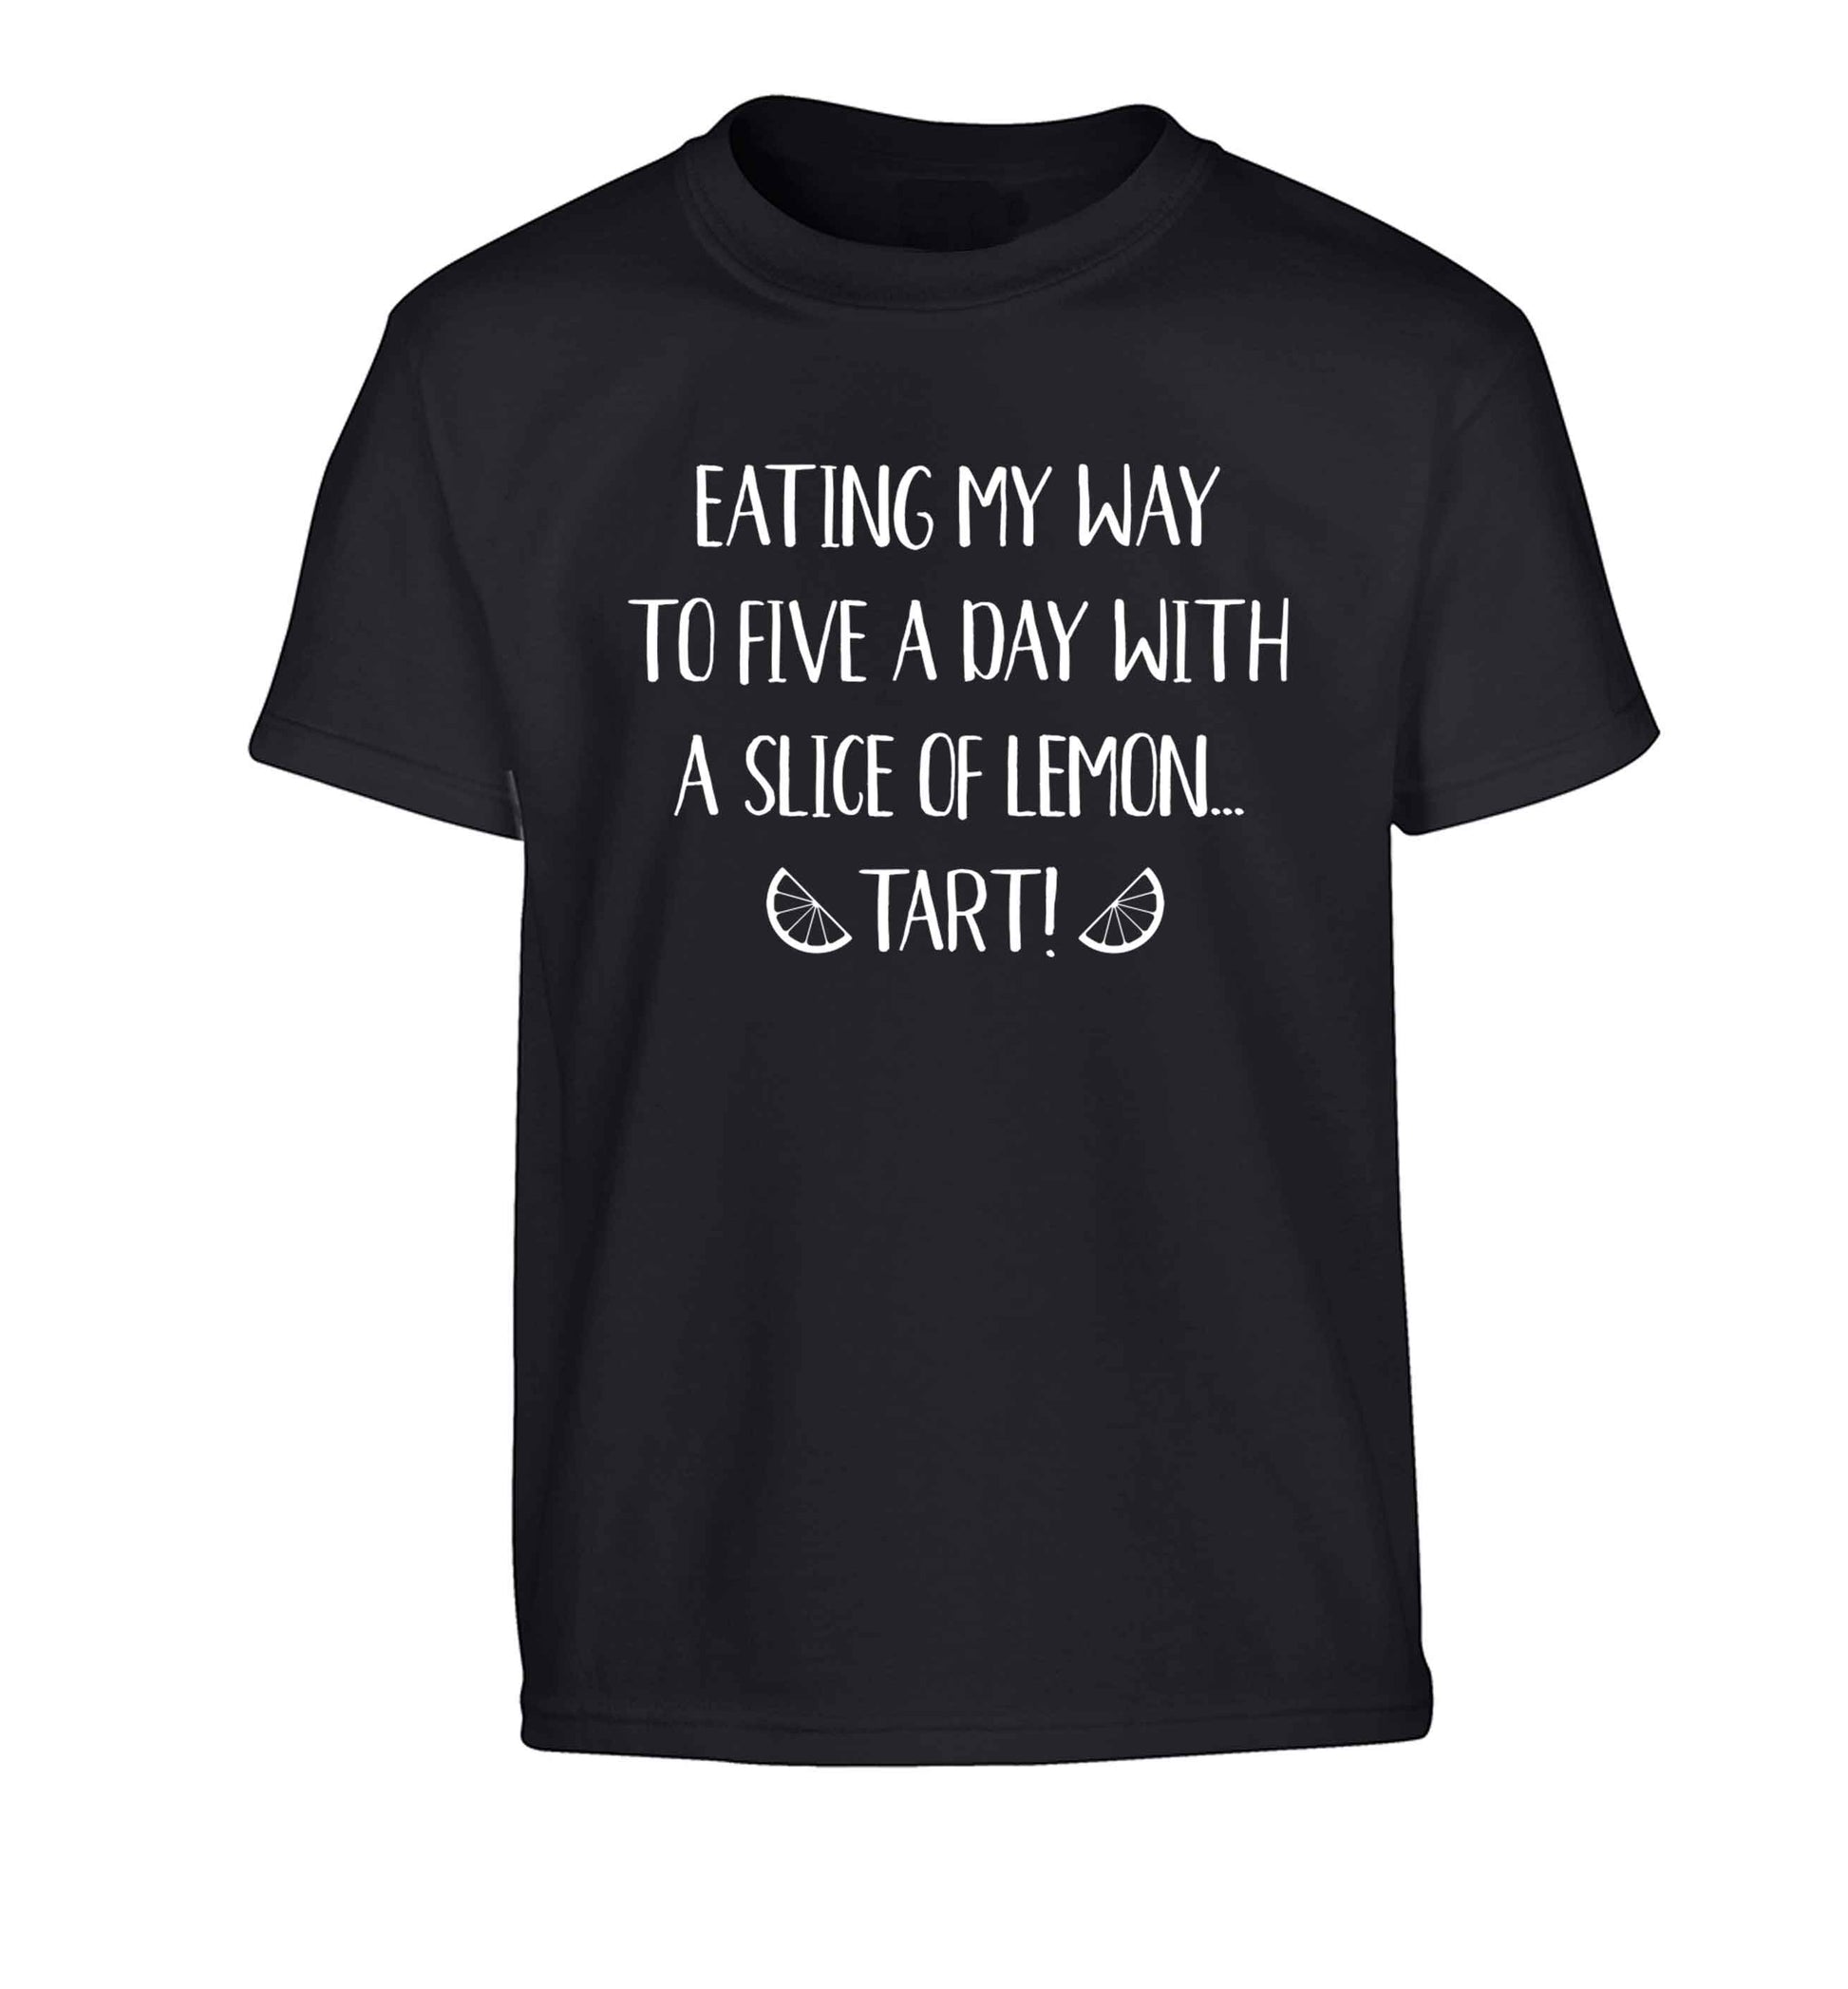 Eating my way to five a day with a slice of lemon tart Children's black Tshirt 12-13 Years